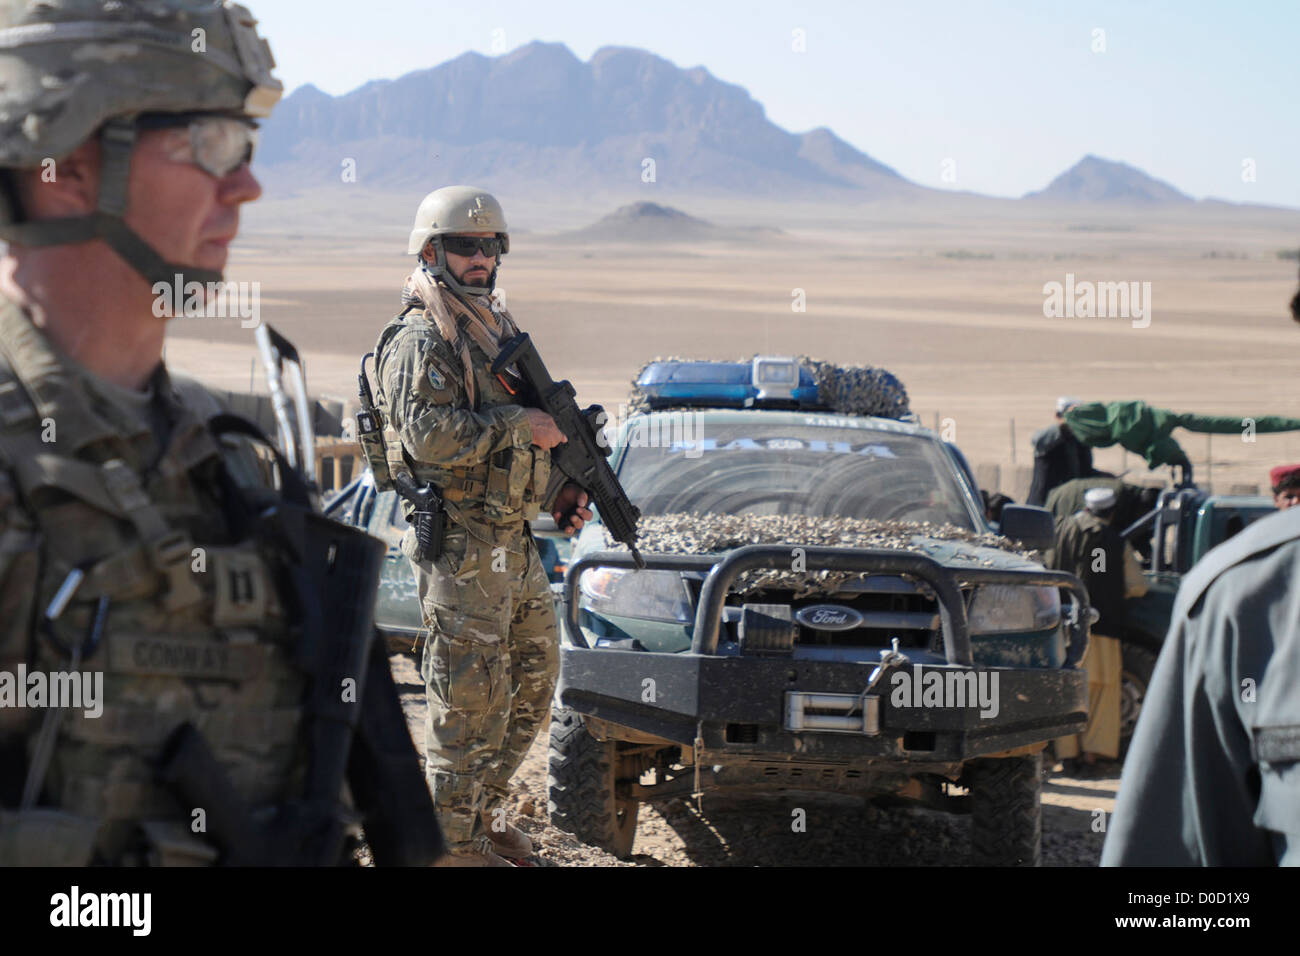 An Albanian Special Forces soldier provides security during an assessment of a police sub-station construction project with coalition forces and Afghan Uniformed Police members in Kandahar province, Afghanistan, Nov. 7, 2012. Stock Photo